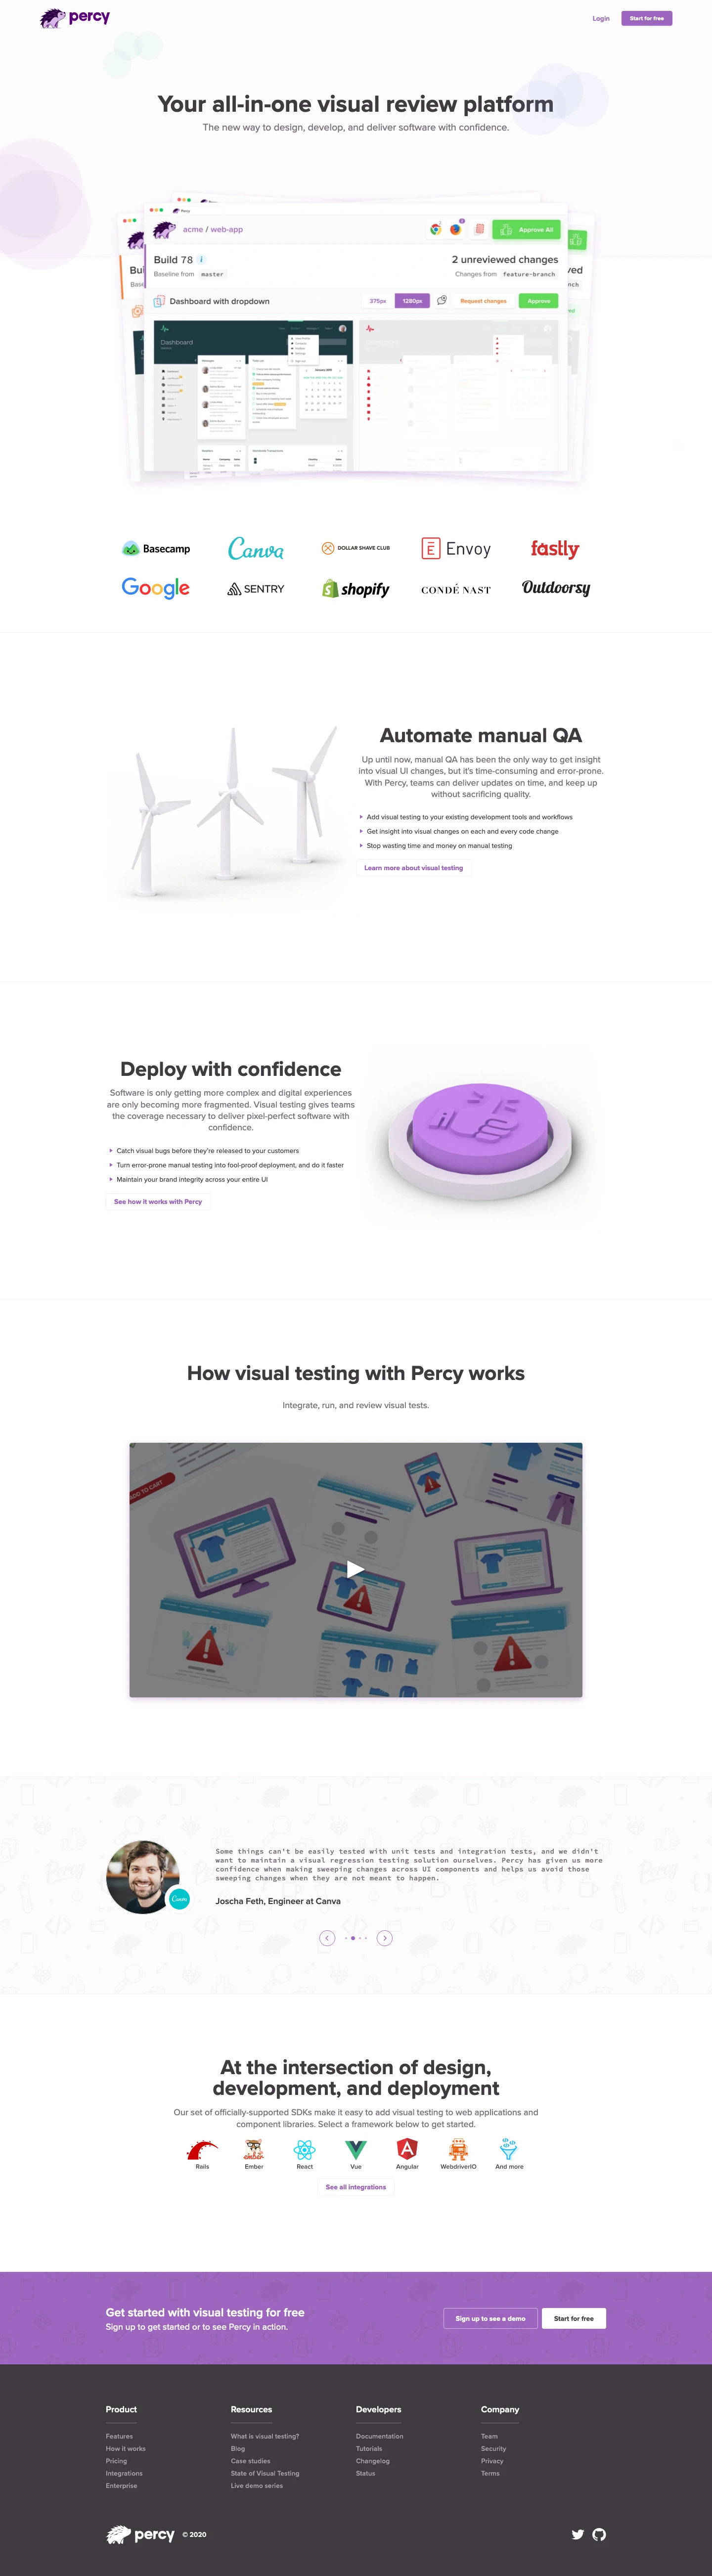 Percy Landing Page Example: Your all-in-one visual review platform. The new way to design, develop, and deliver software with confidence.